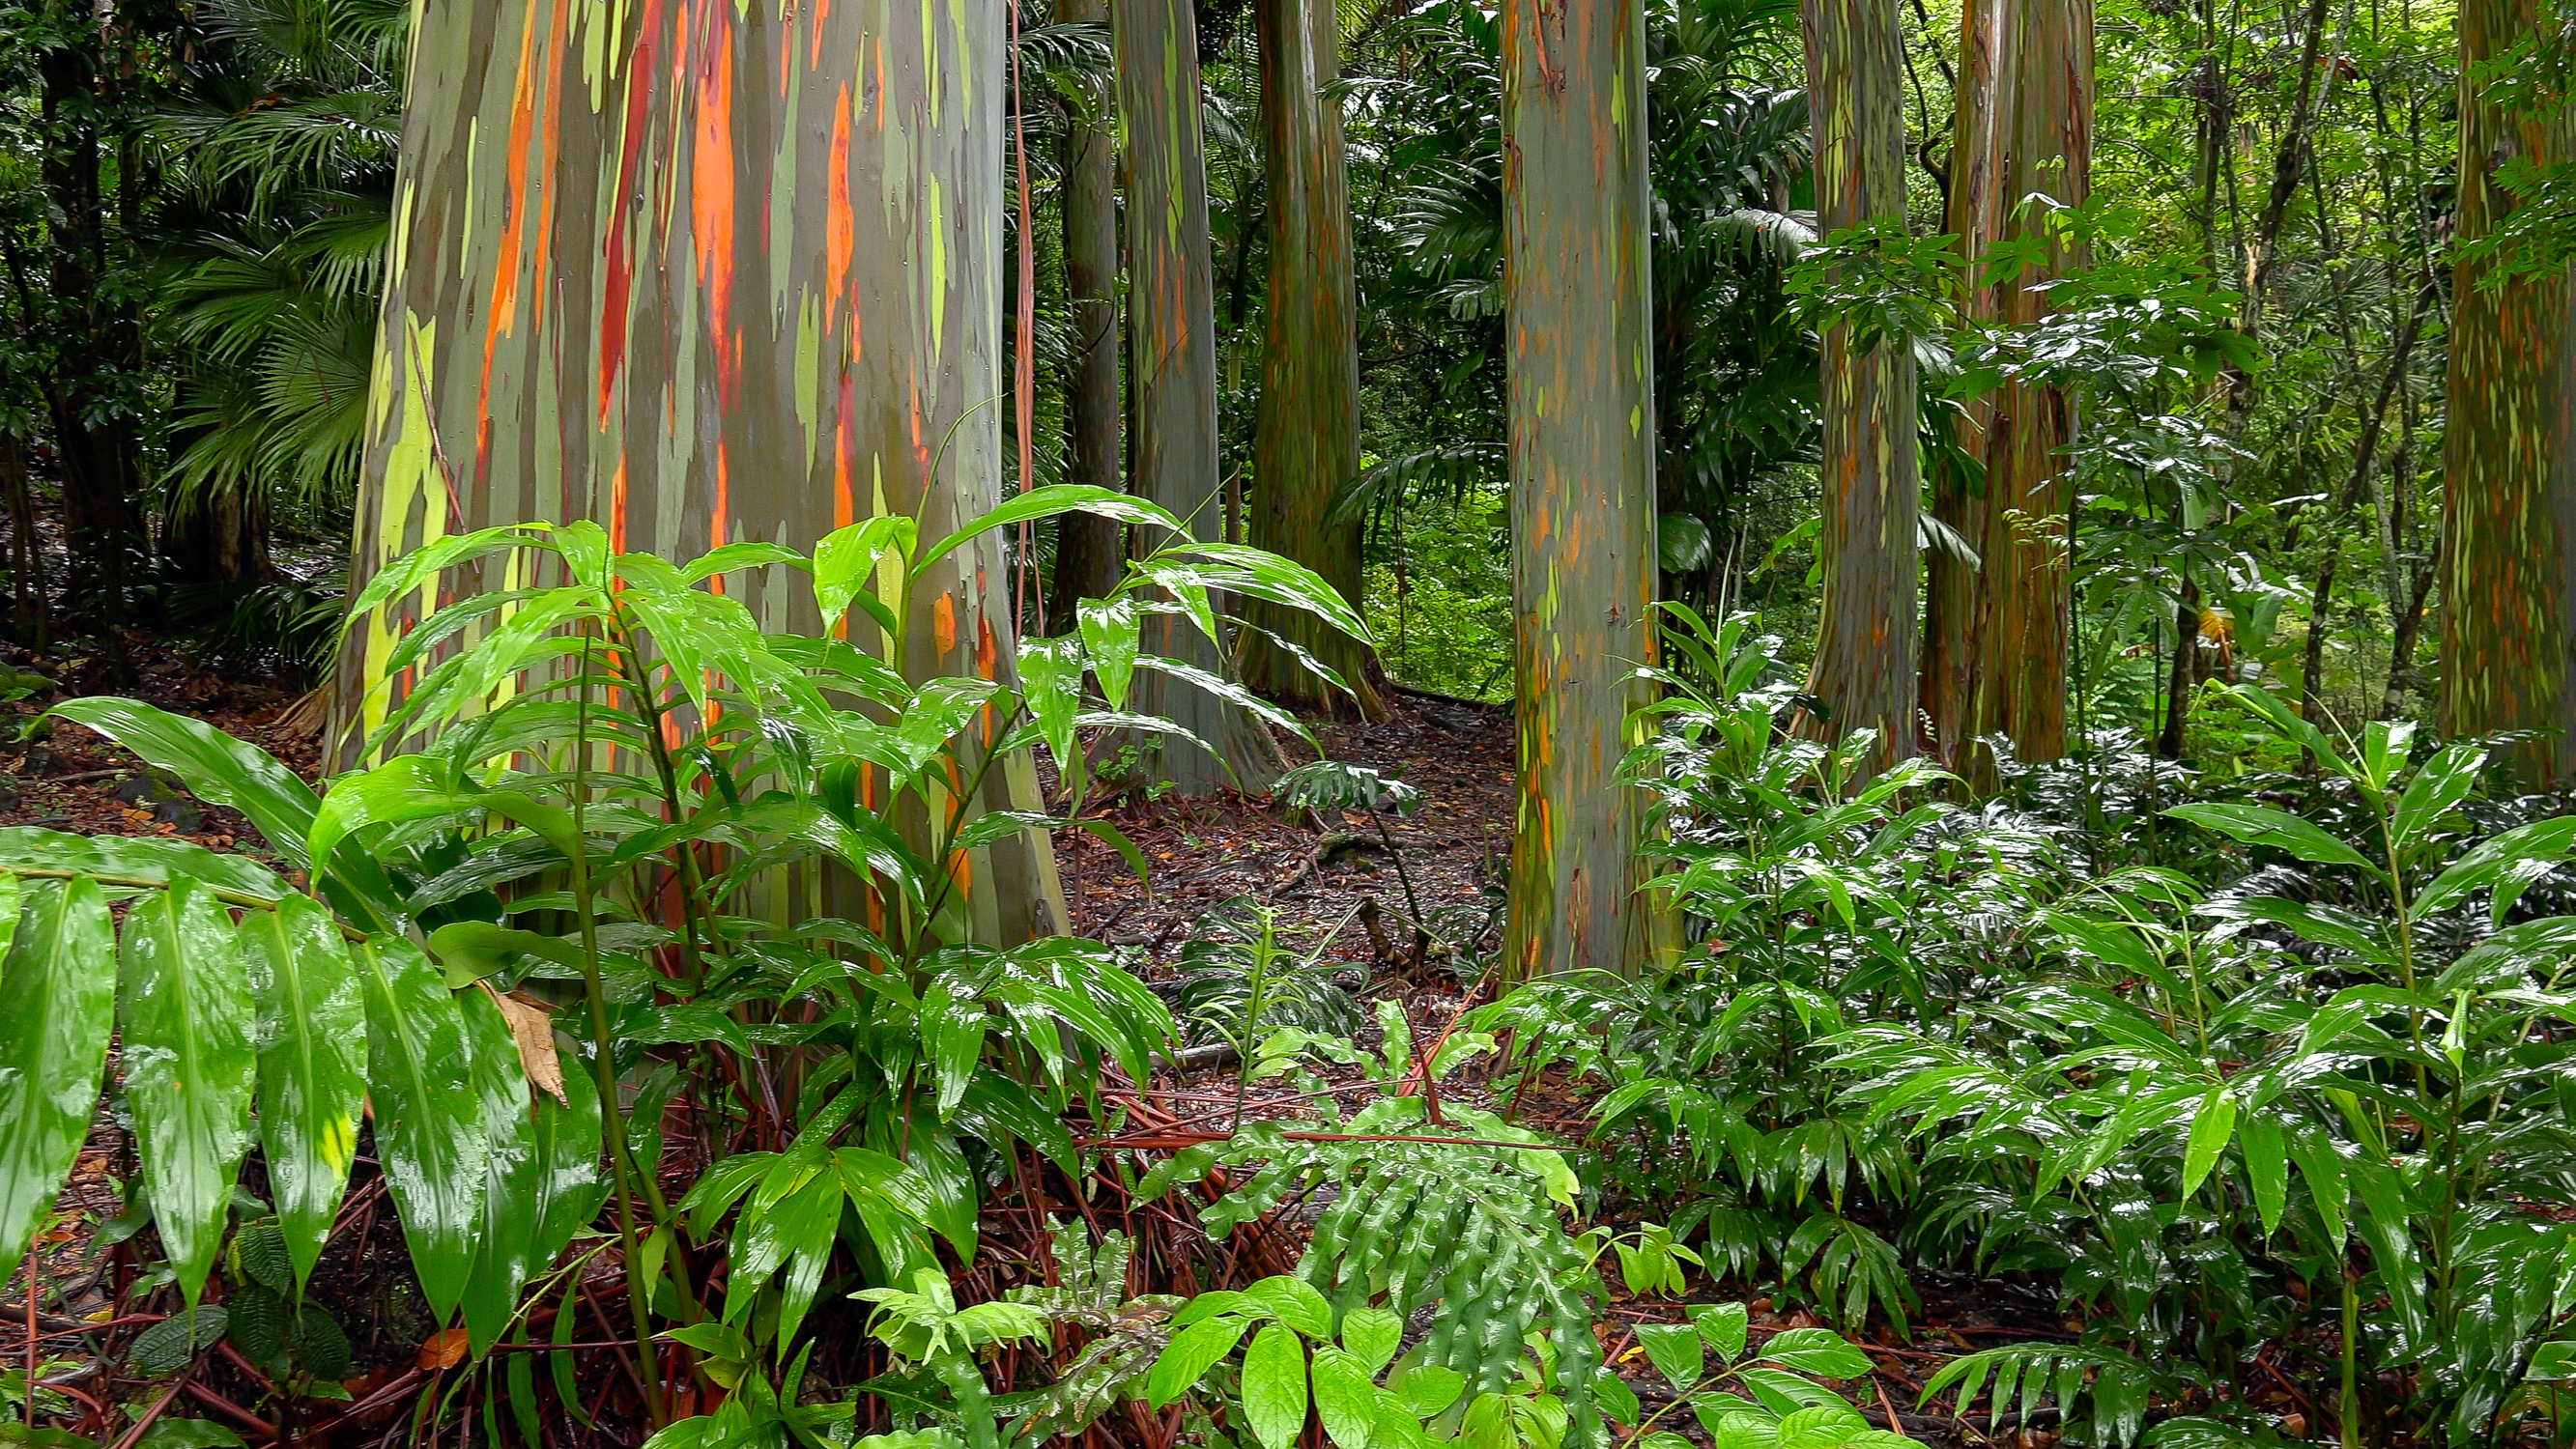 Explore the Amazing Road to Hana with Your Family Using My Helpful Guide - Rainbow Eucalyptus Trees